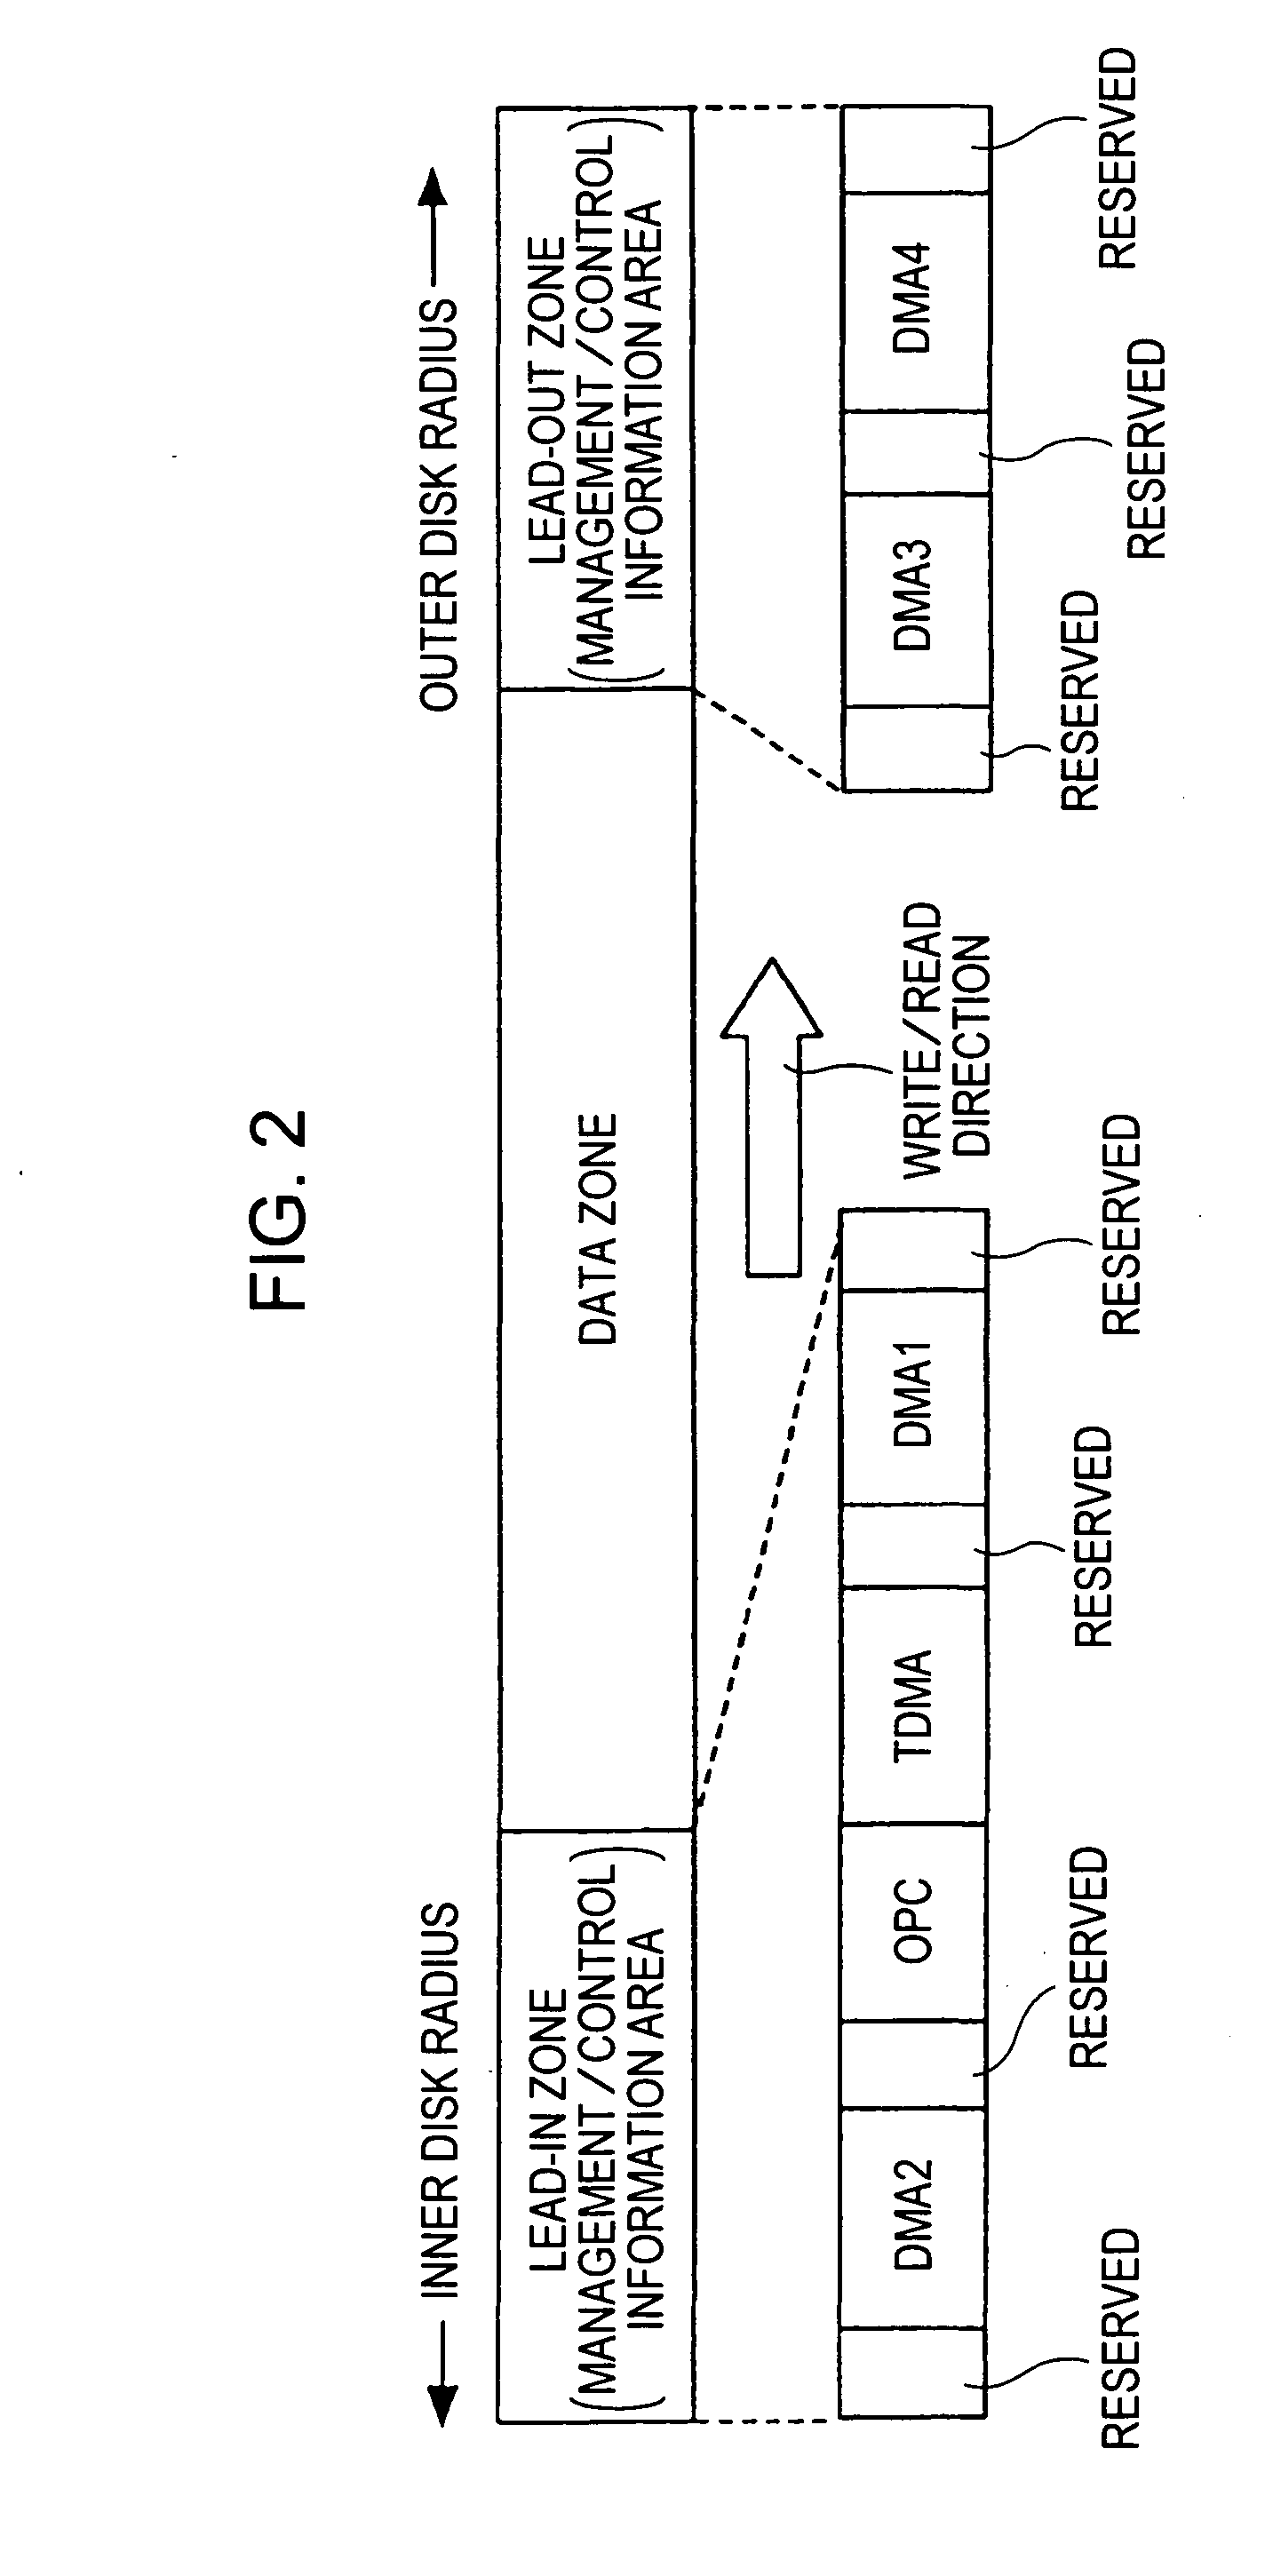 Method of replacement process, recording apparatus, and recording system